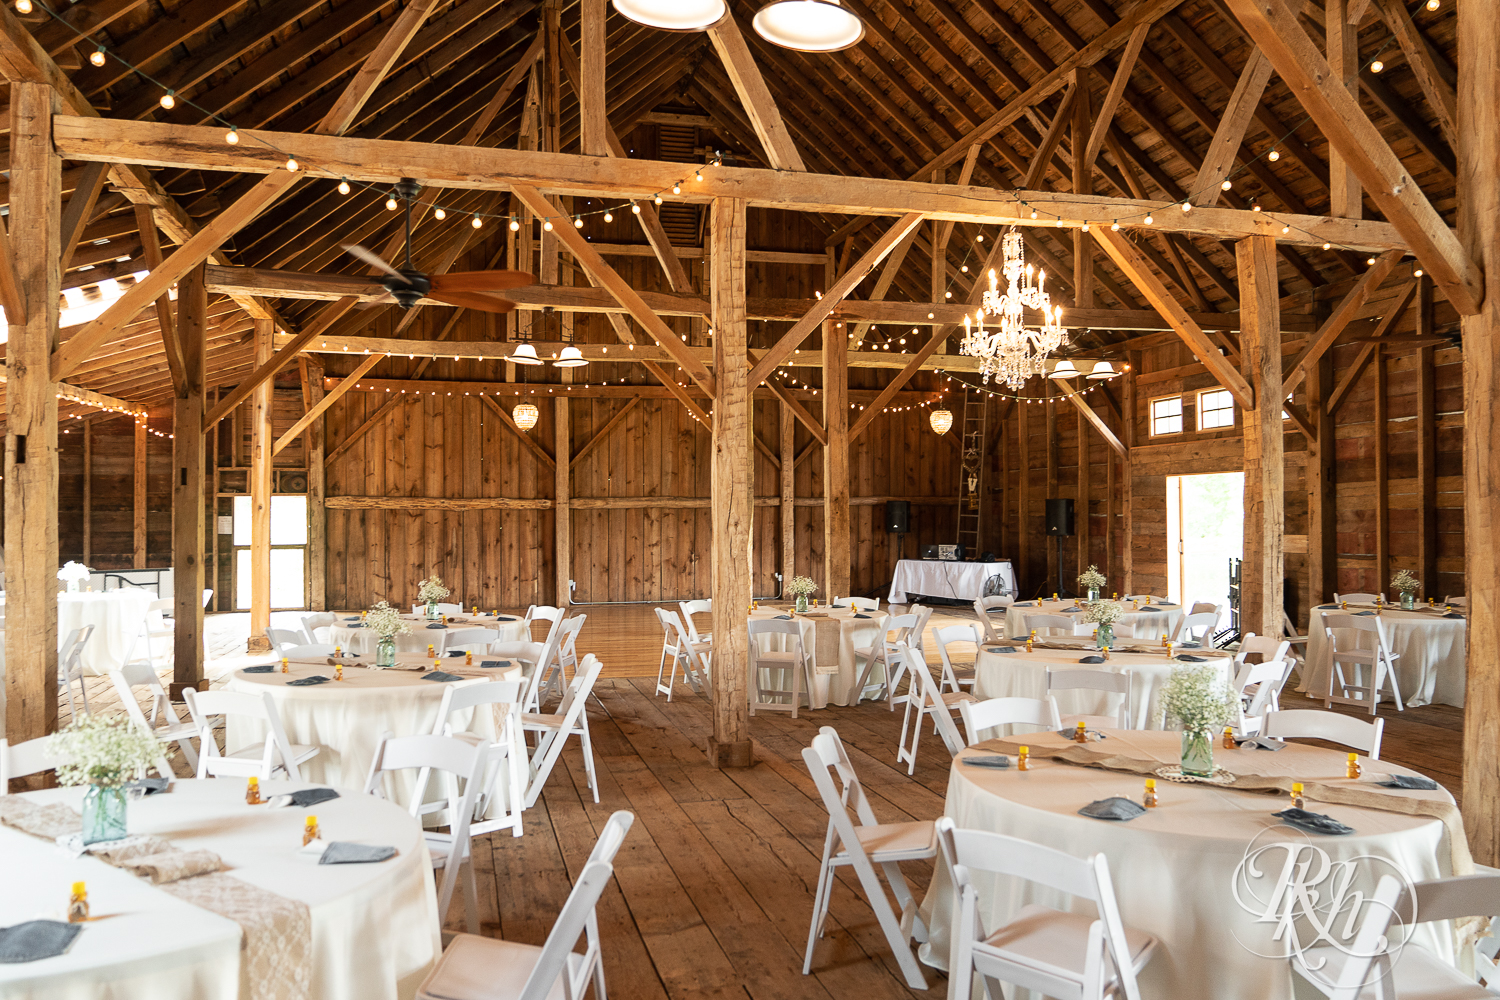 Indoor country barn wedding ceremony setup at Croix View Farm in Osceola, Wisconsin.